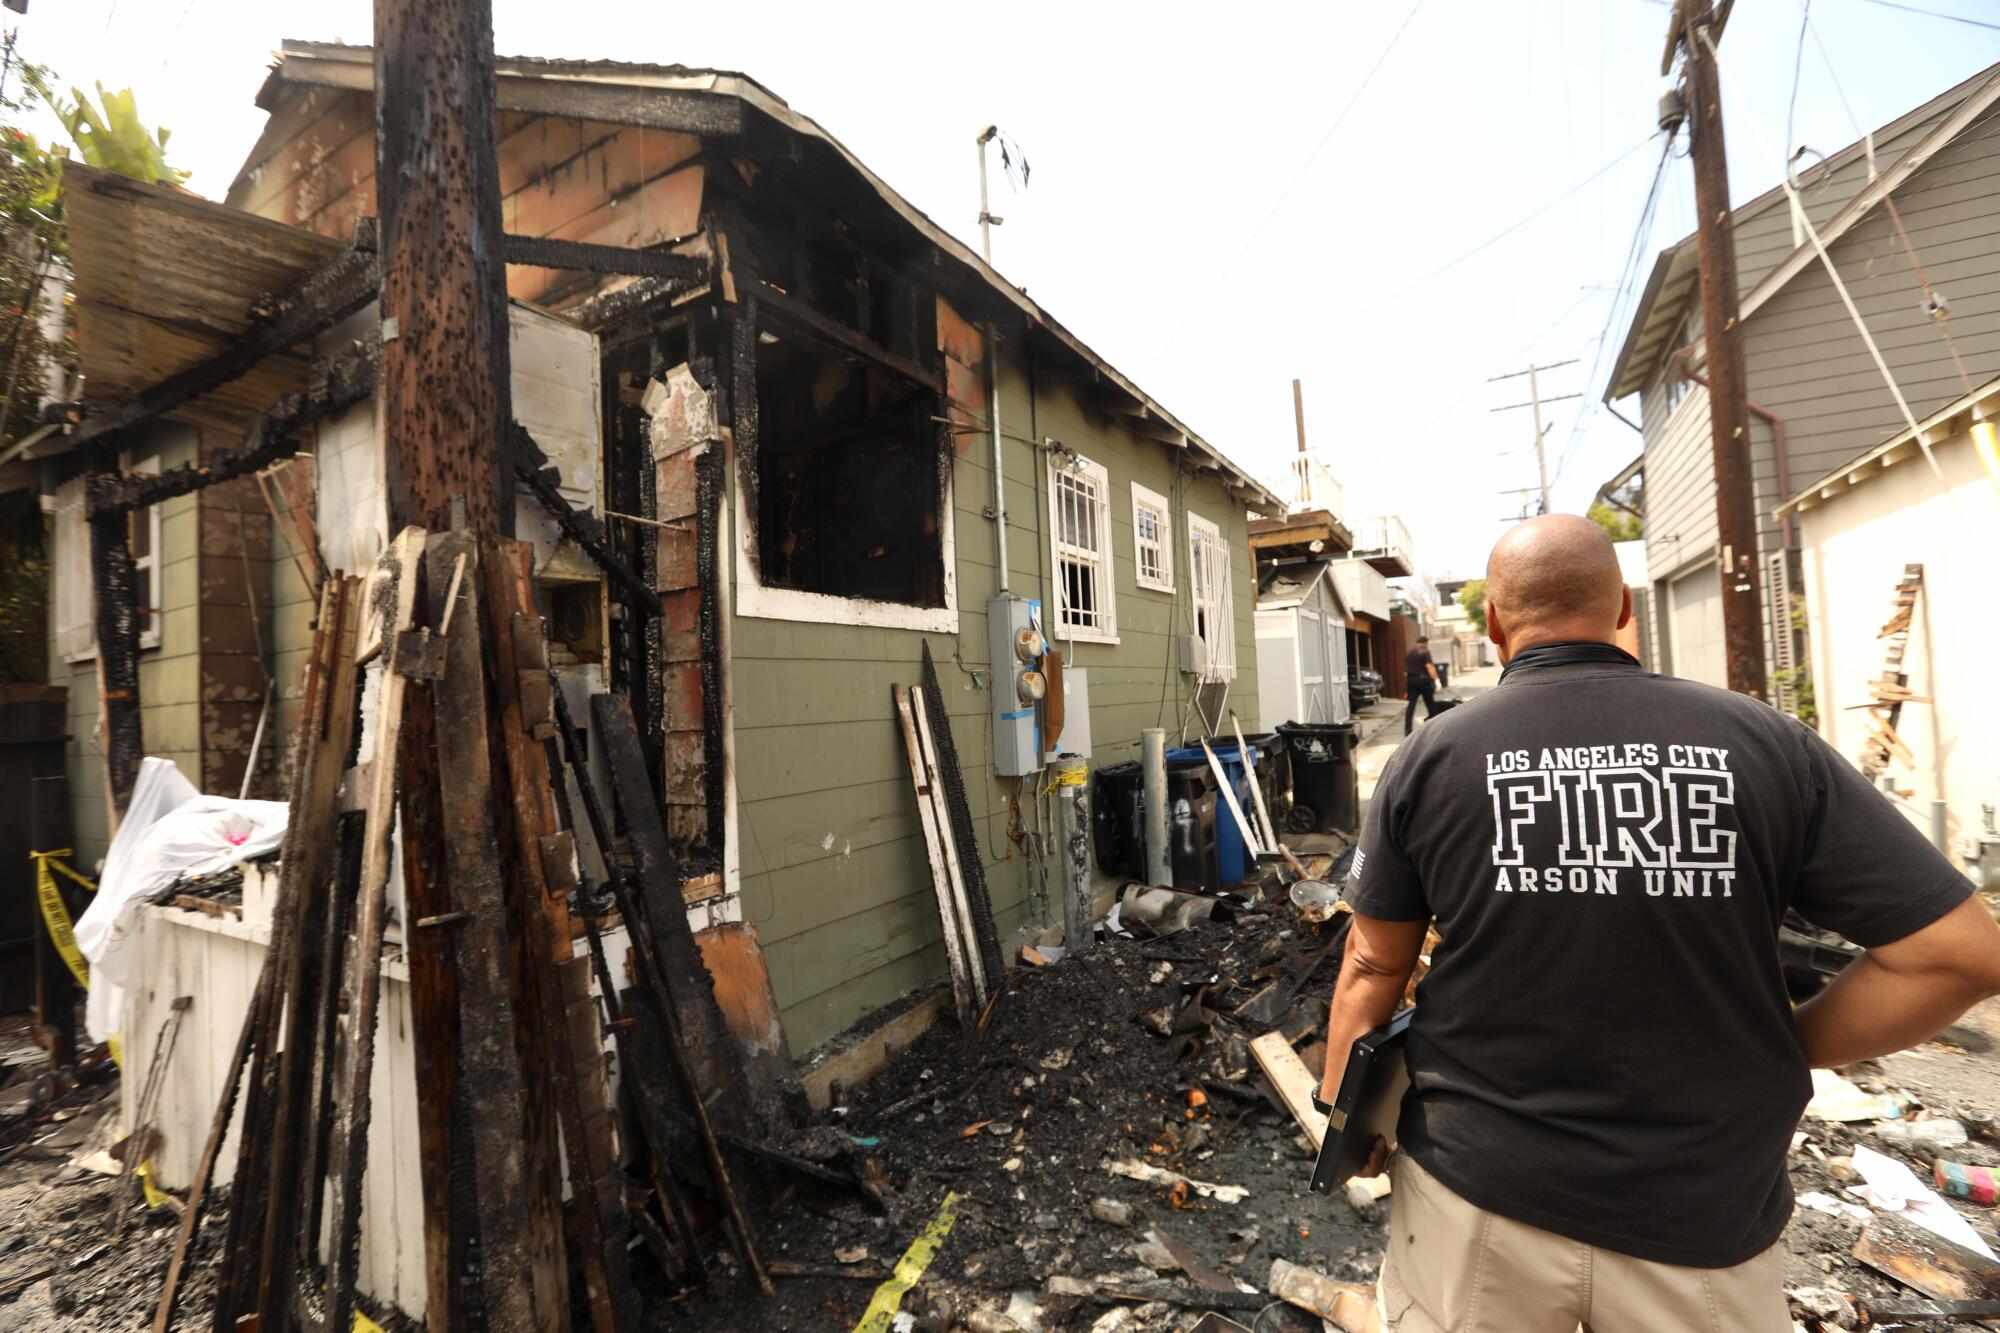 A fire investigator stands next to the remains of a house that was damaged in a fire